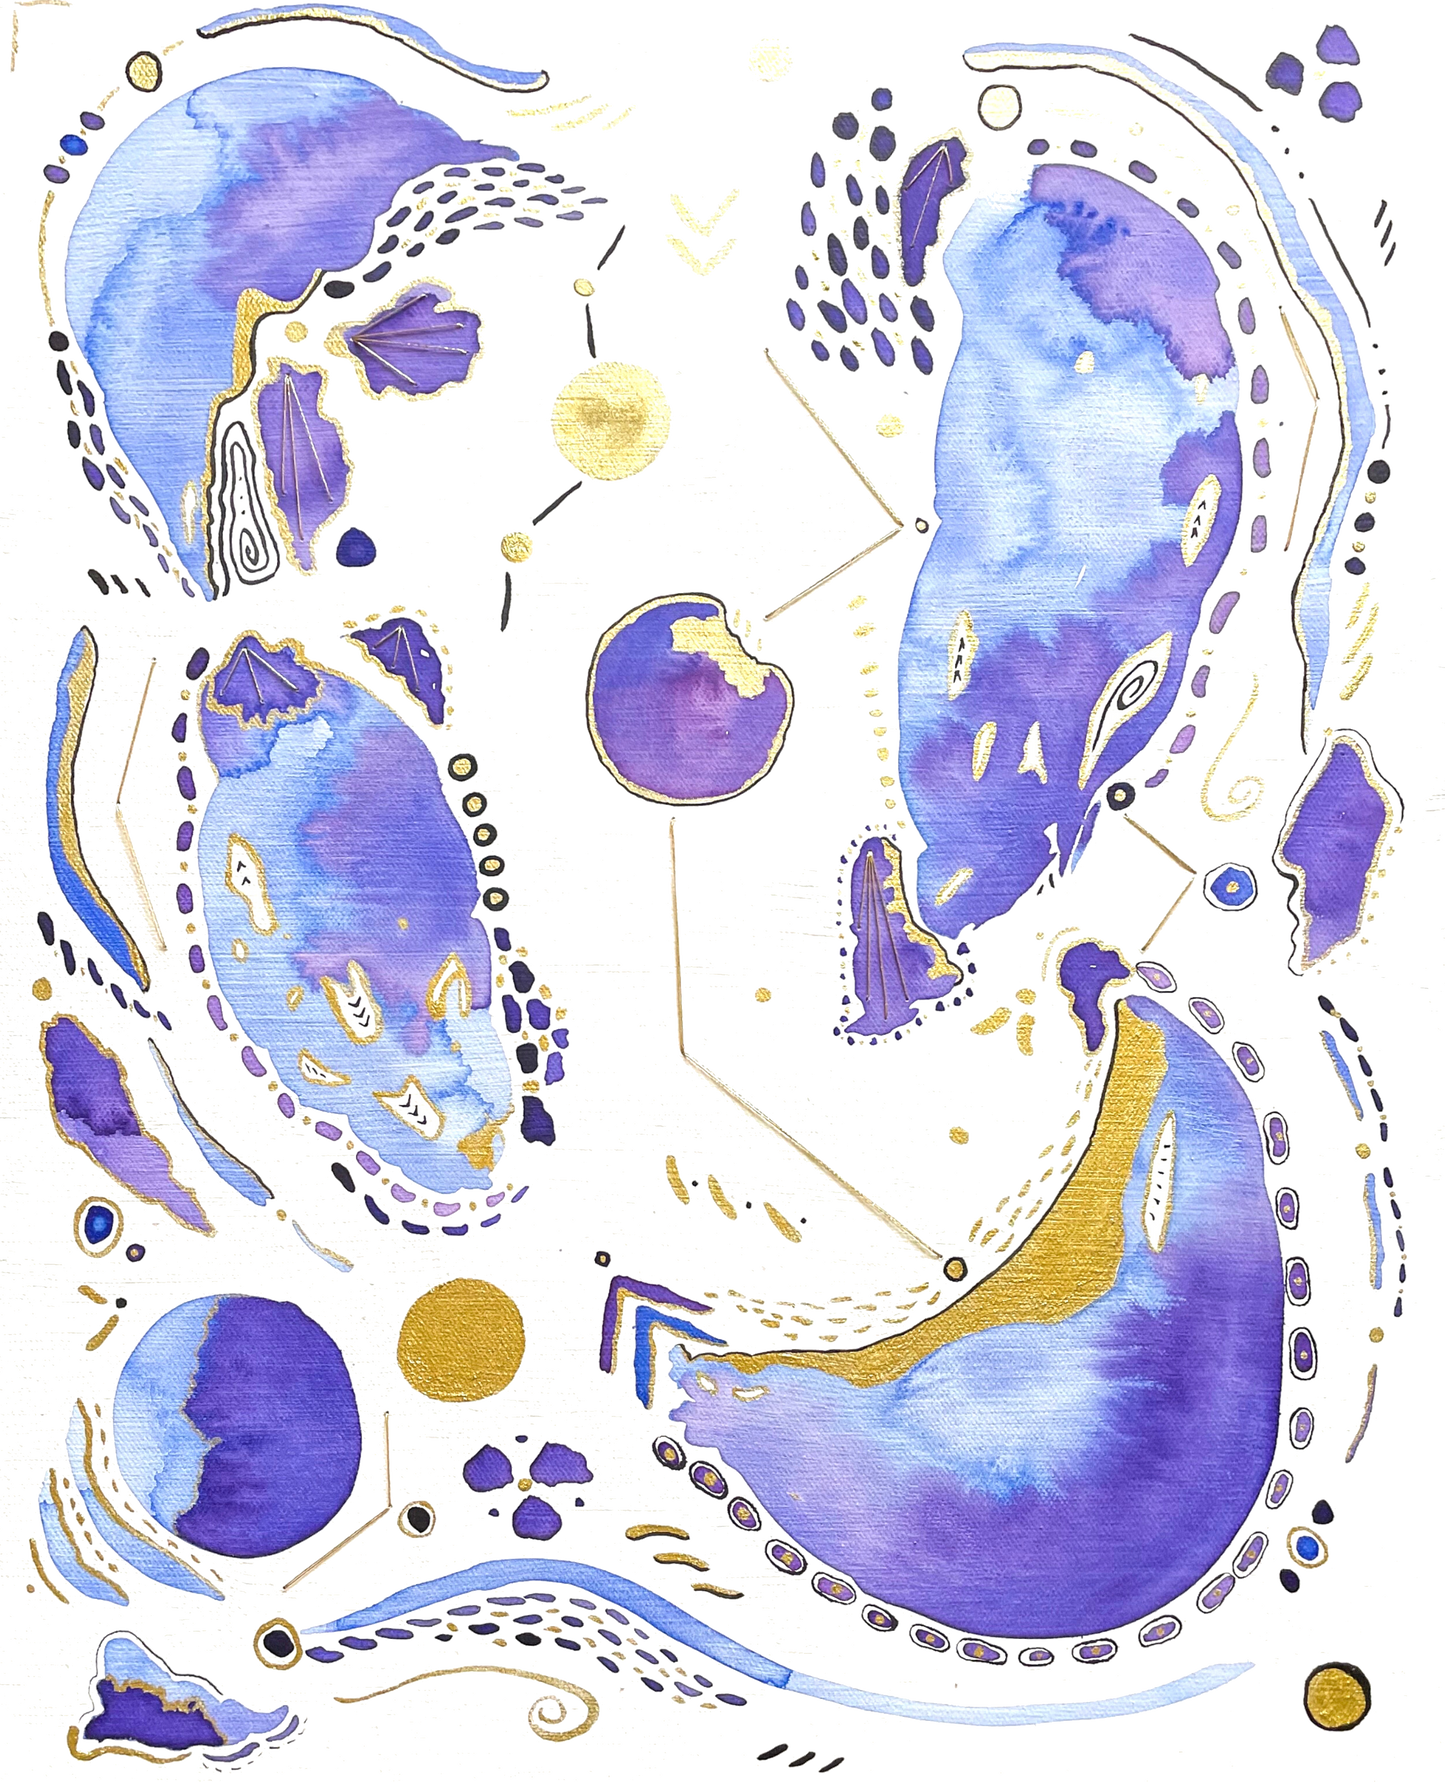 Cosmic Ocean Painting - Original 16x20 Watercolor and Ink on Canvas